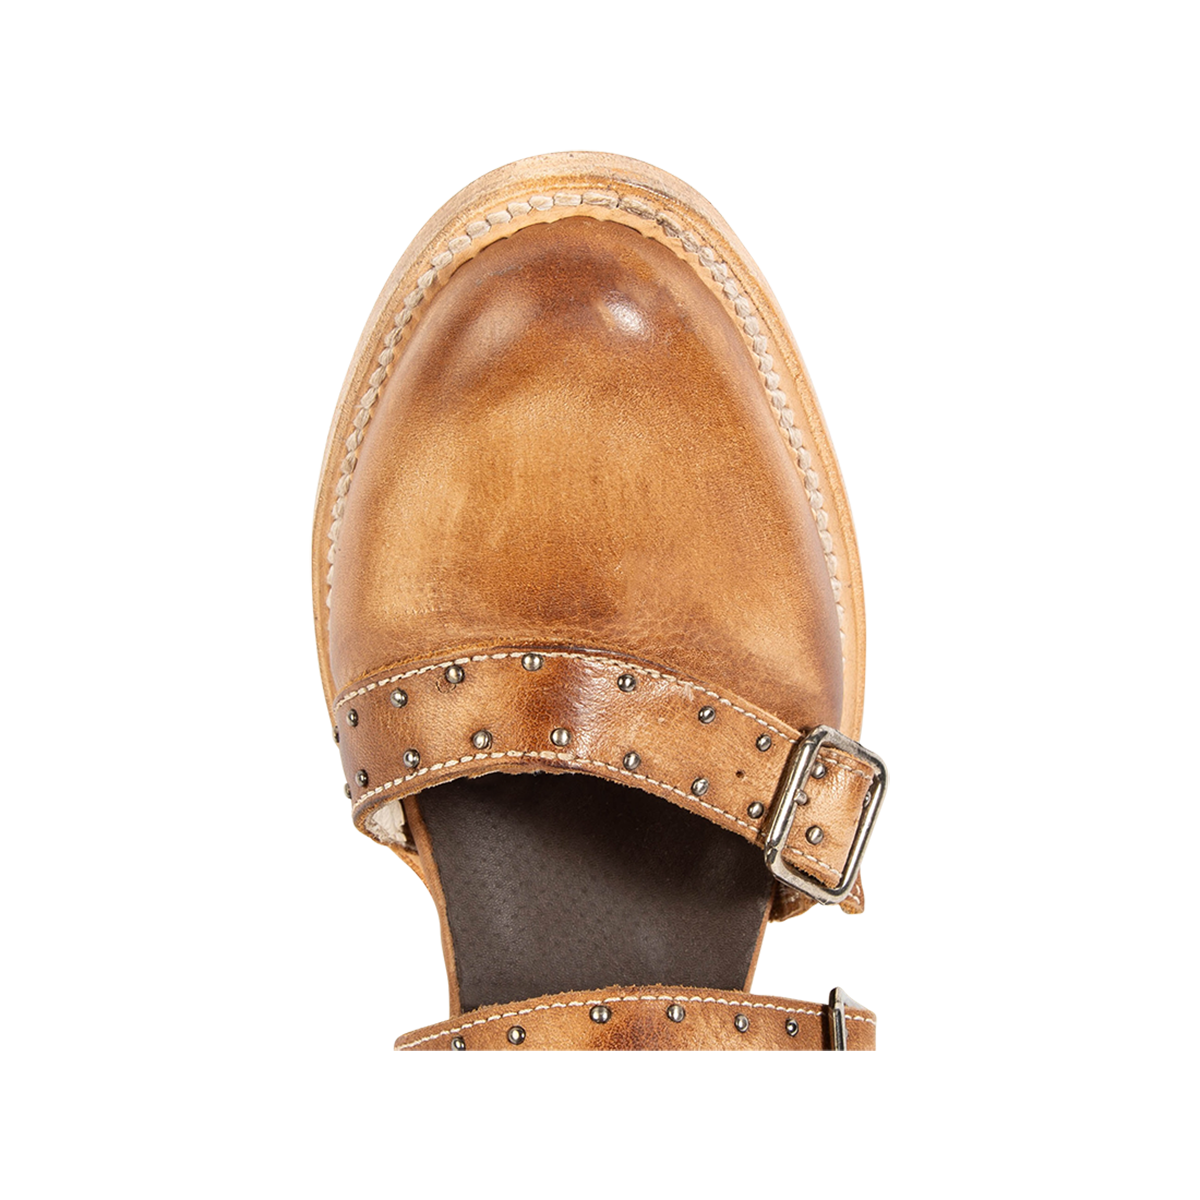 Top view showing an almond toe and embellishments on FREEBIRD women's Salty wheat leather bootie